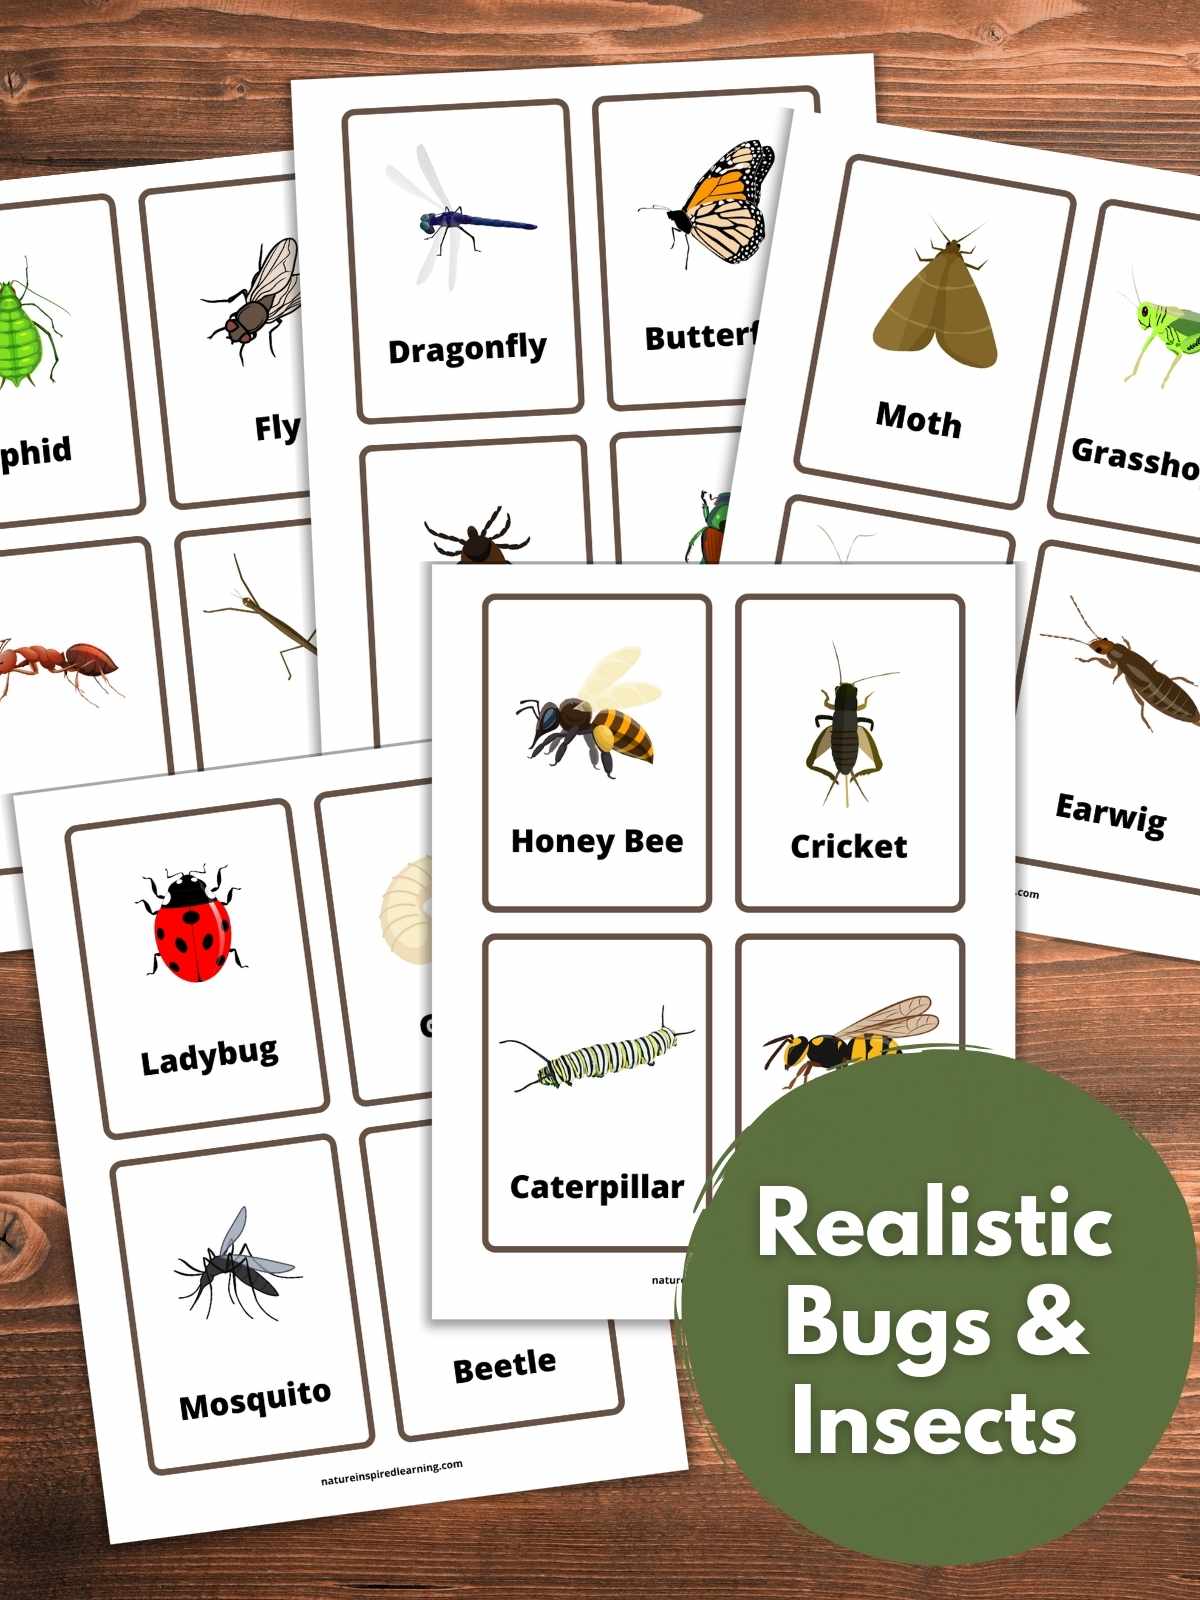 set of colorful insect flashcards with realistic images of bugs and the common name of the insect. Green circle bottom right with text overlay